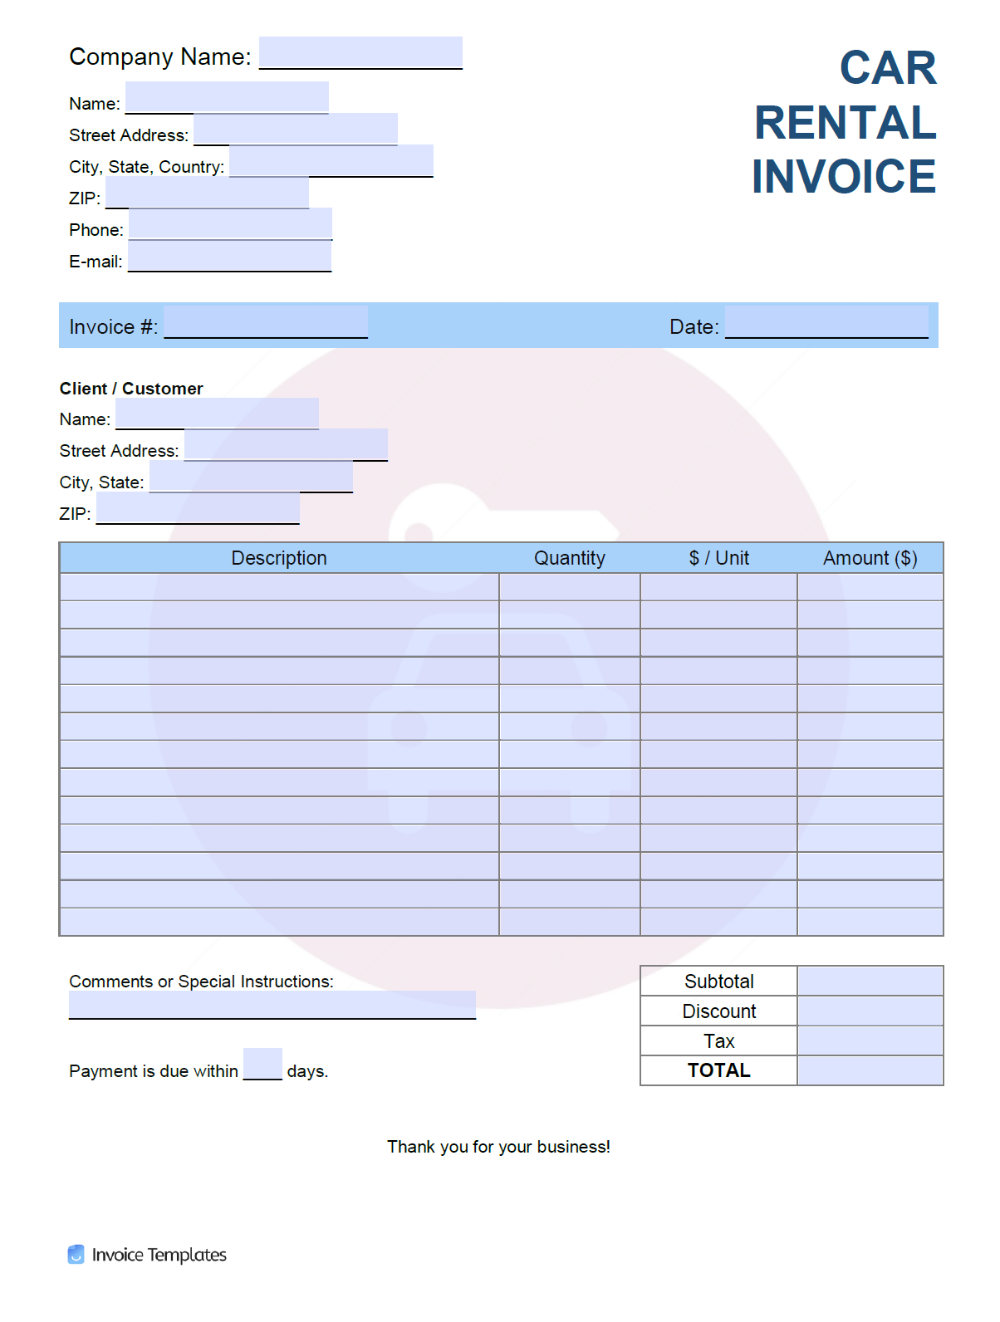 example of rent a car invoice template